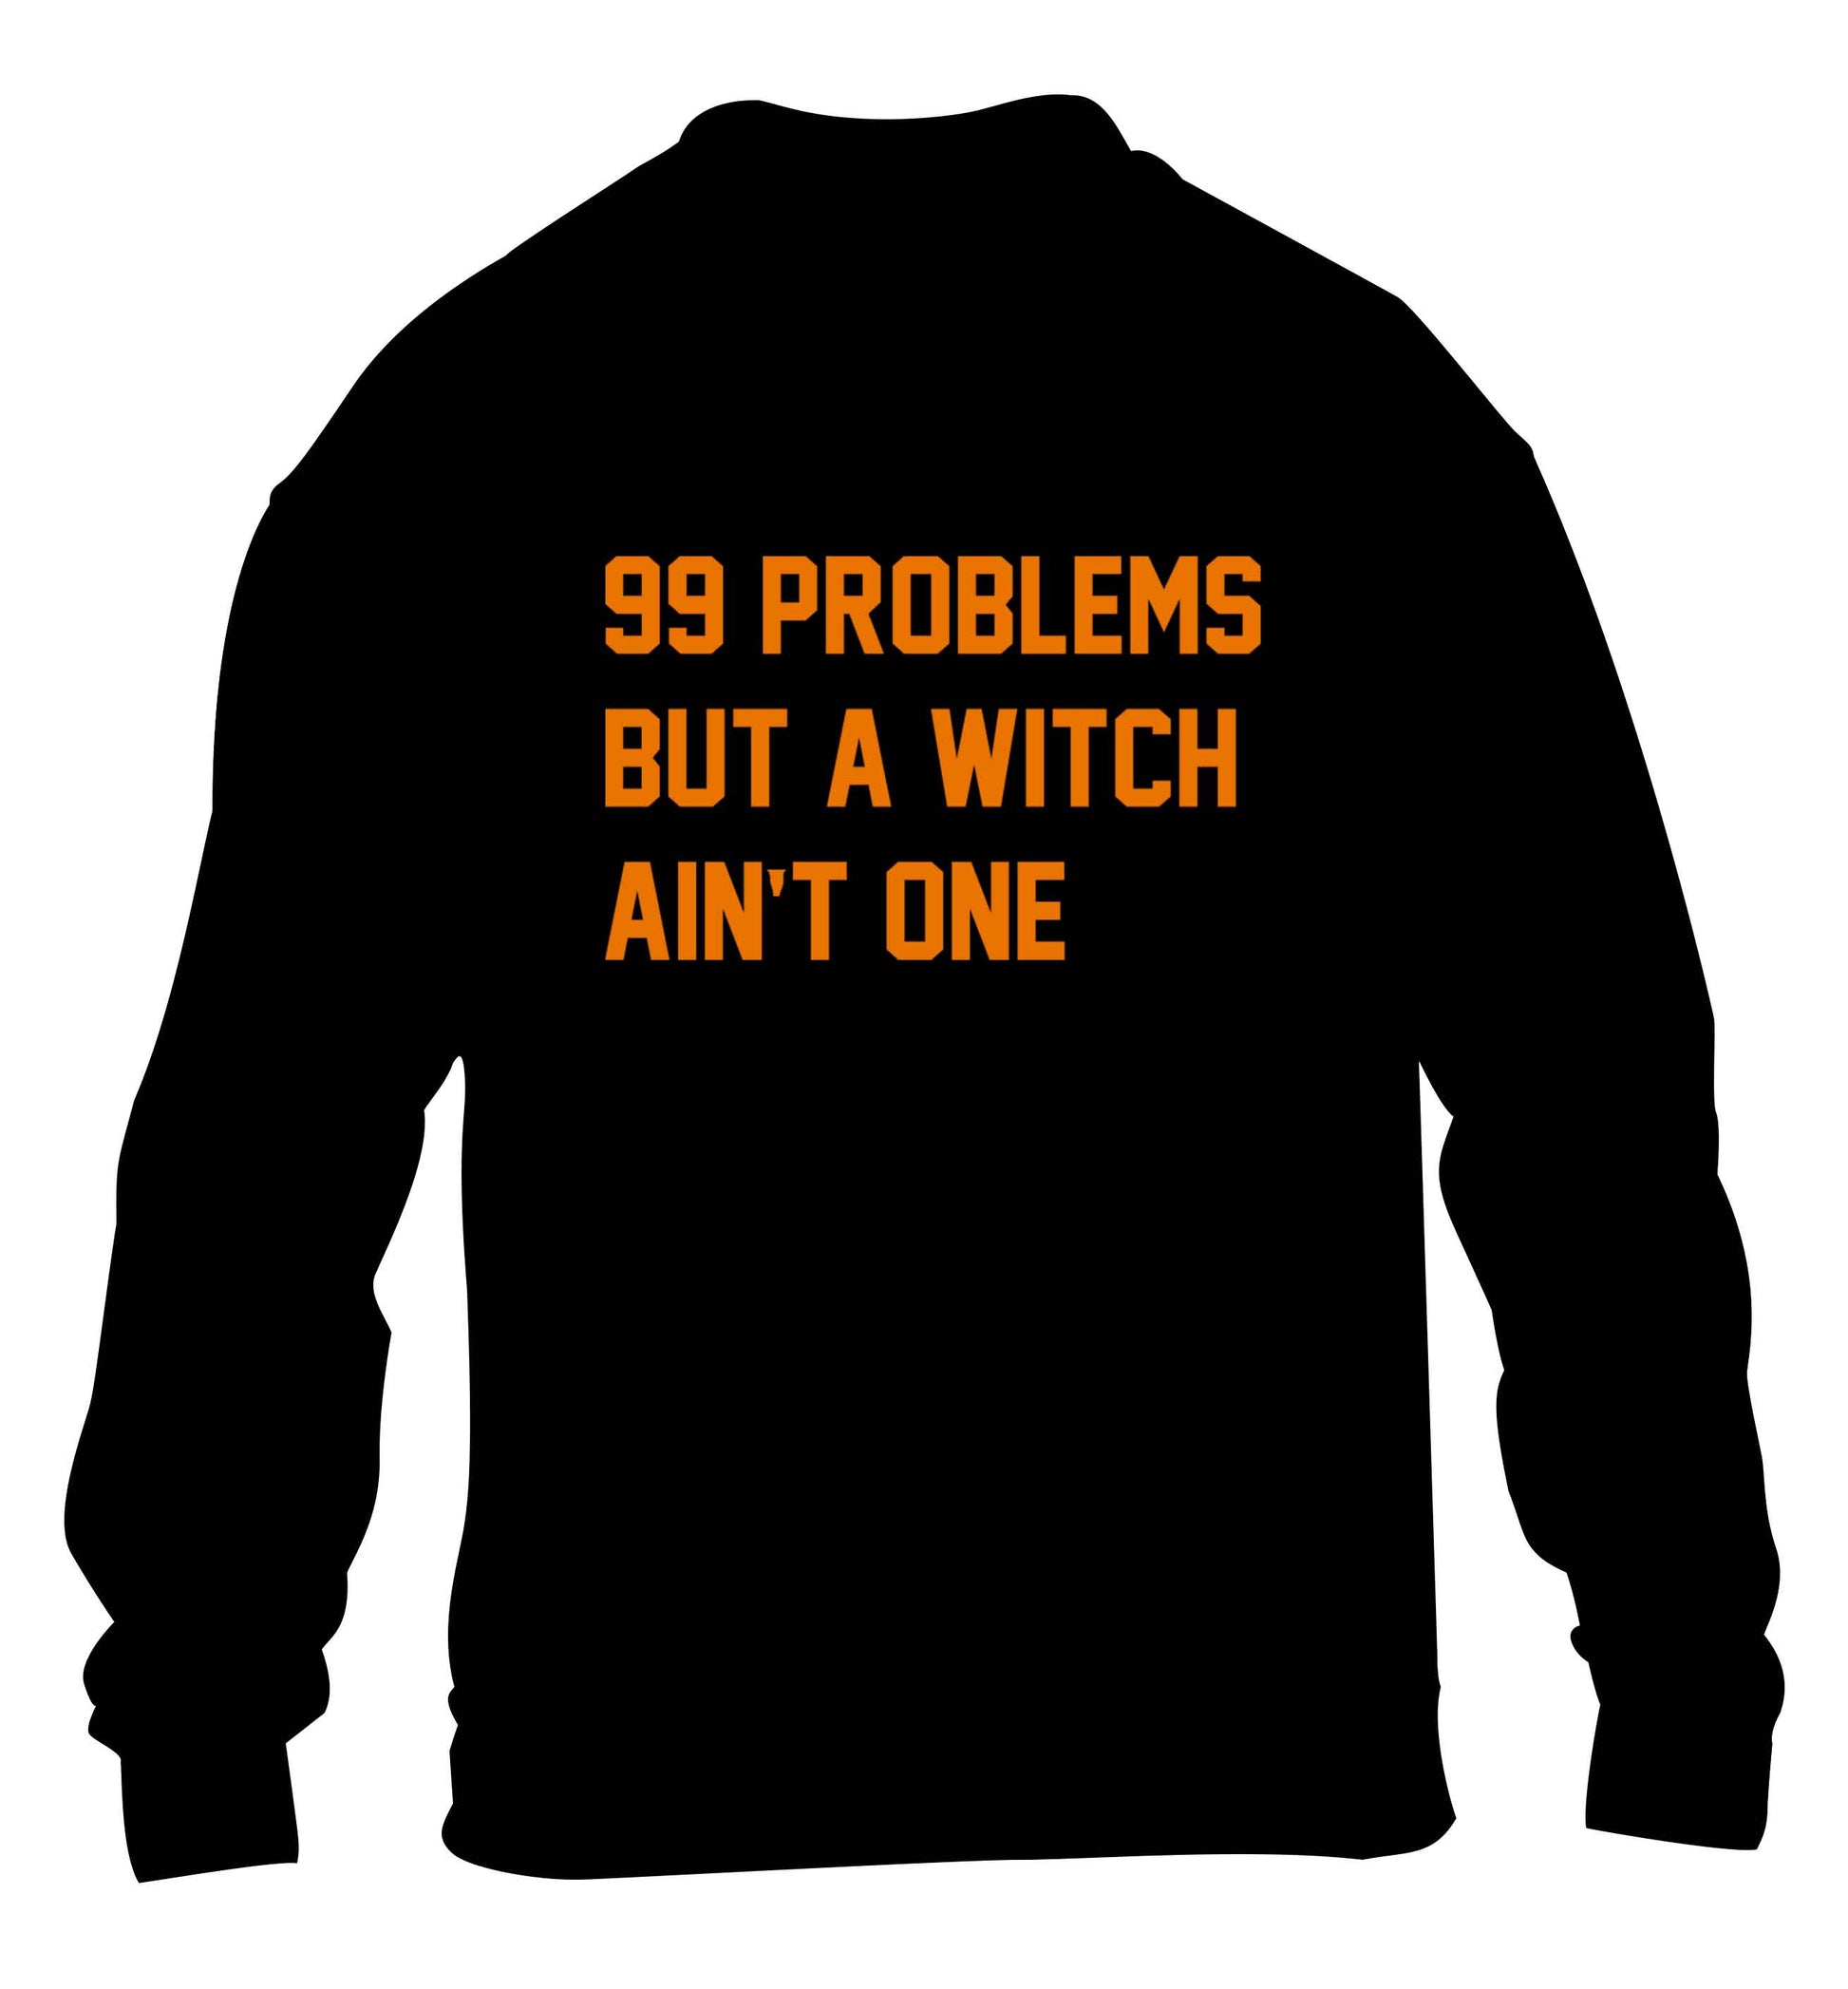 99 Problems but a witch aint one children's black sweater 12-13 Years